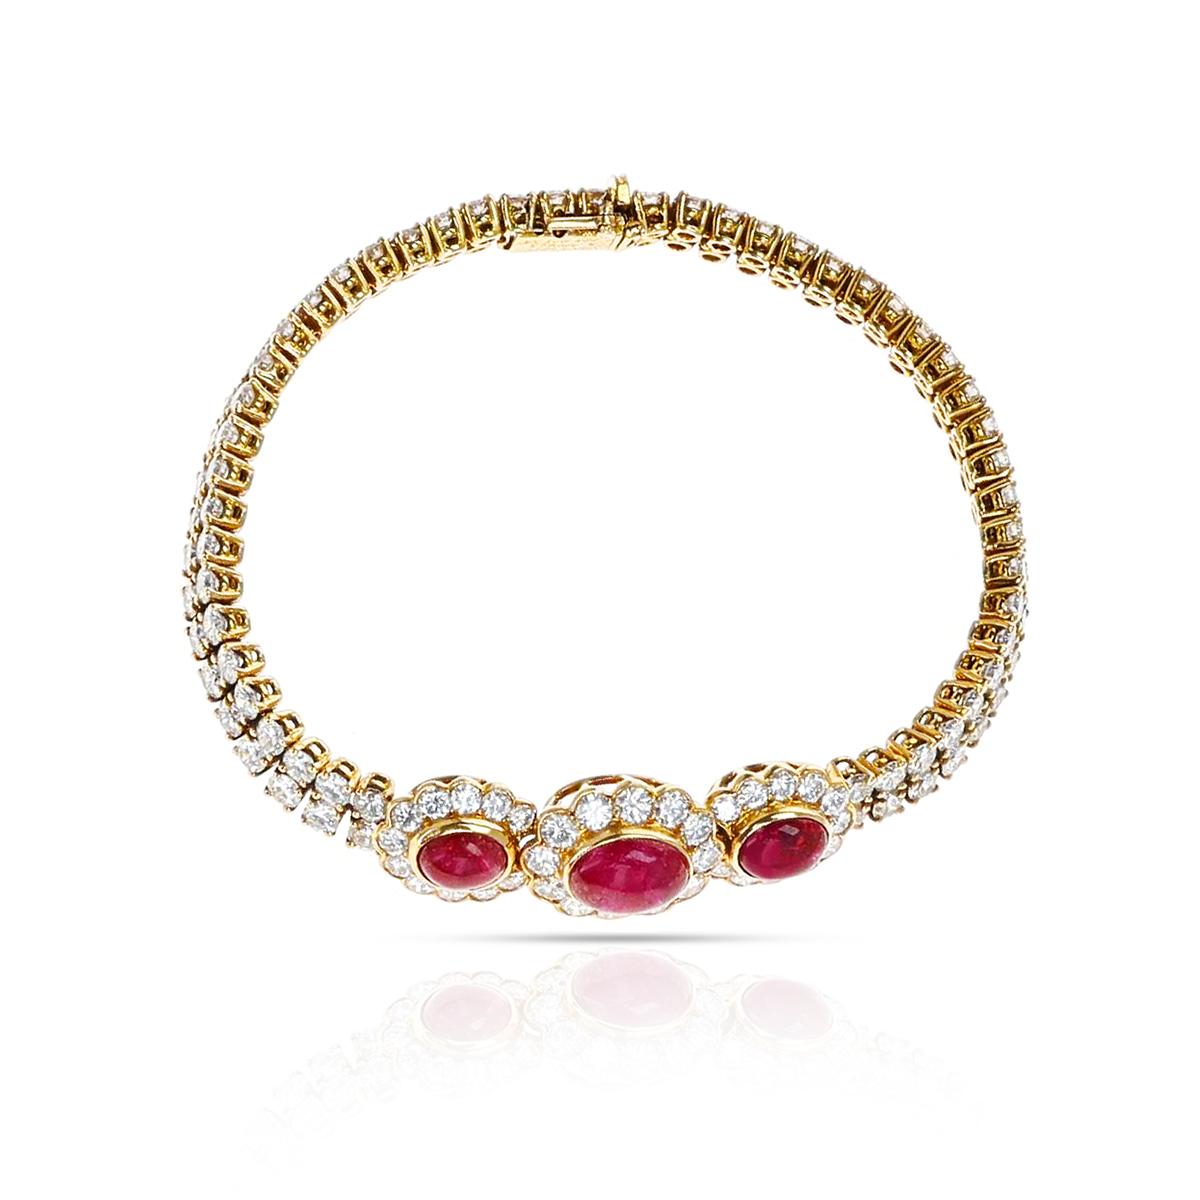 Van Cleef & Arpels Ruby Cabochon and Diamond Bracelet and Necklace Set, 18k For Sale 8